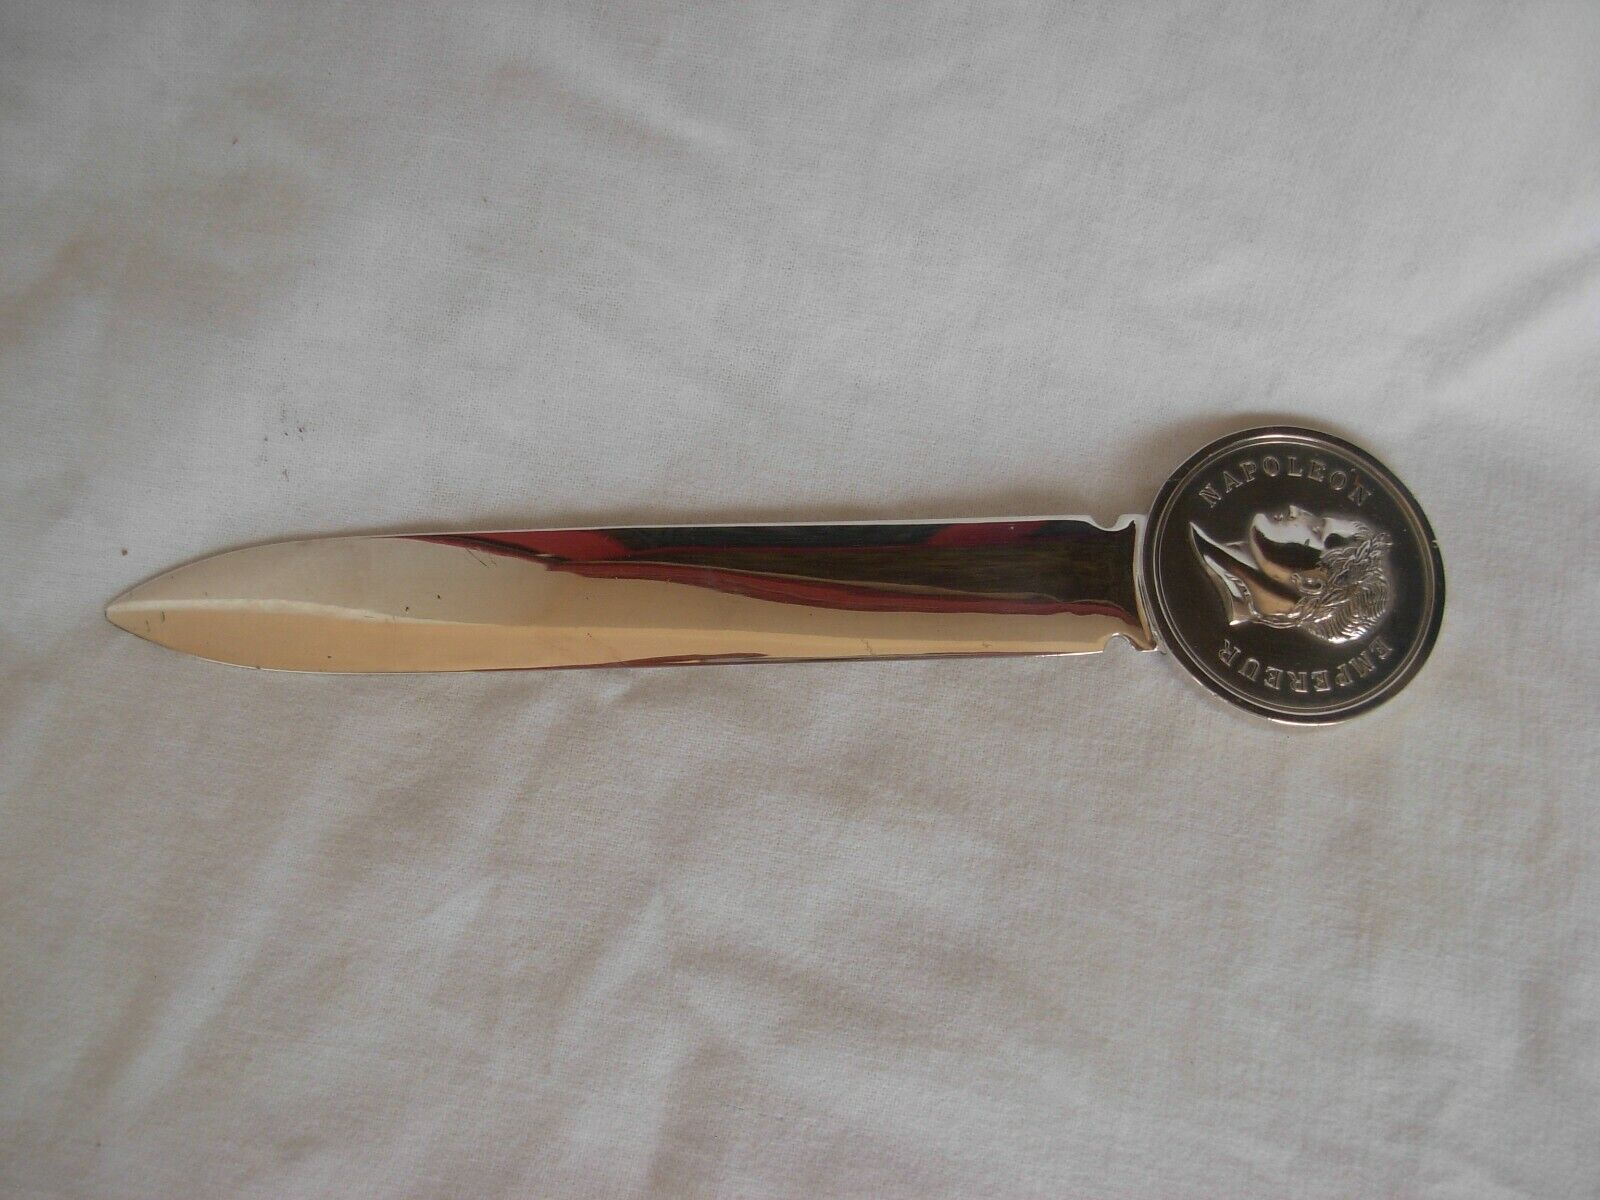 CHRISTOFLE,FRENCH SILVERPLATED PAPER KNIFE,LETTER OPENER,NAPOLEON.